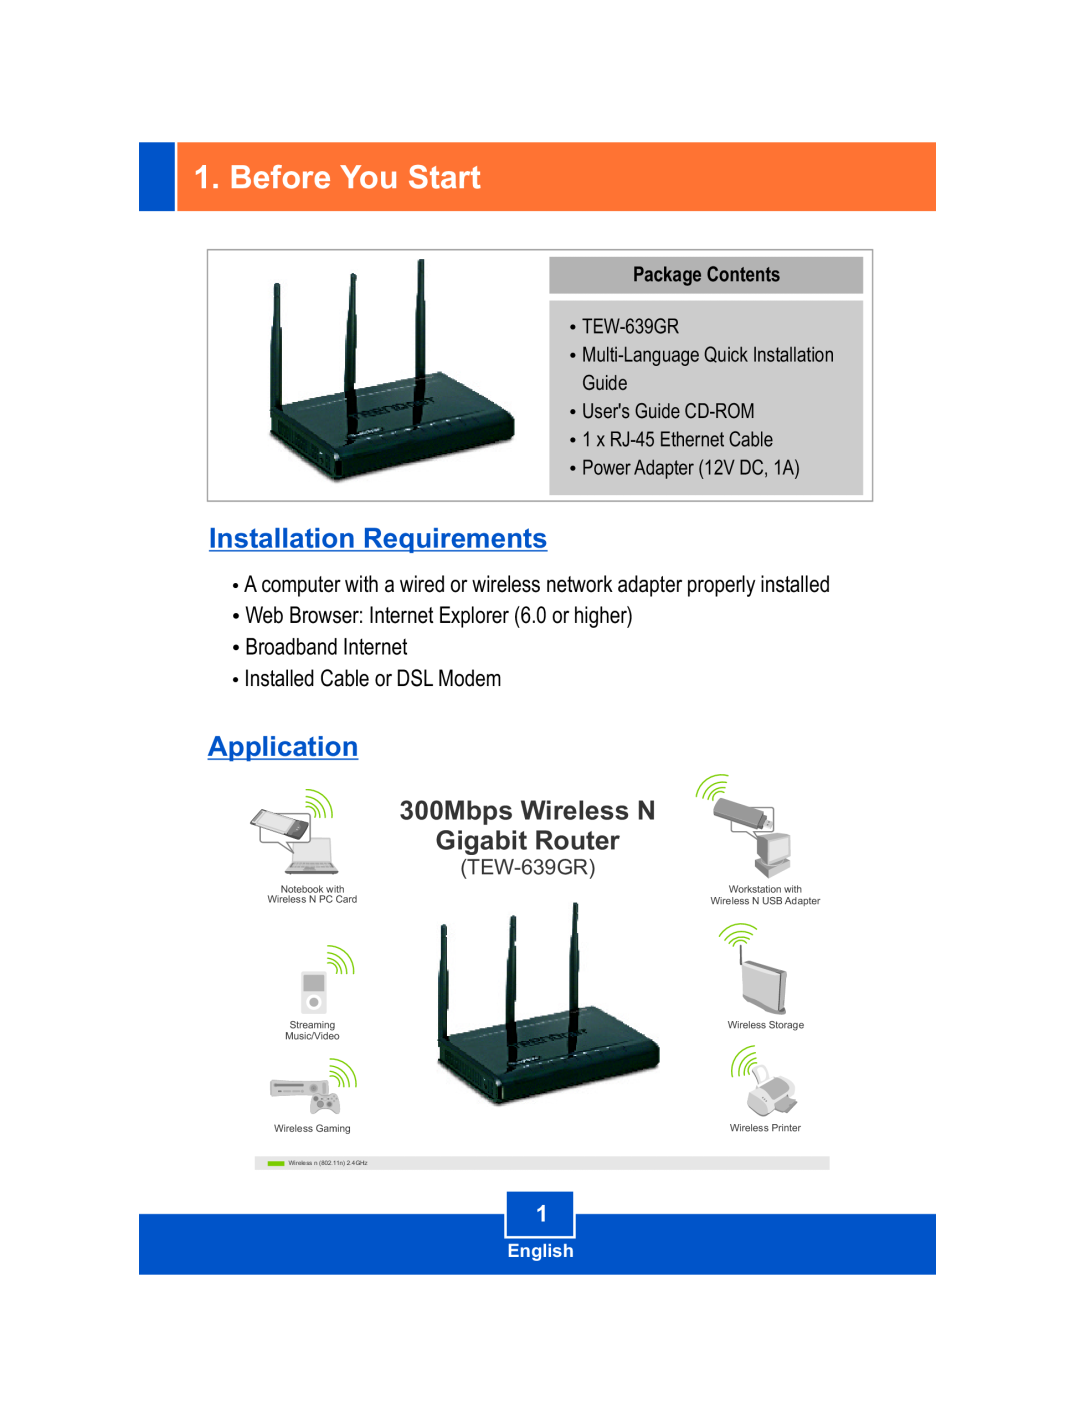 TRENDnet TEW-639GR Before You Start, Installation Requirements, Application, 300Mbps Wireless N, Gigabit Router, English 